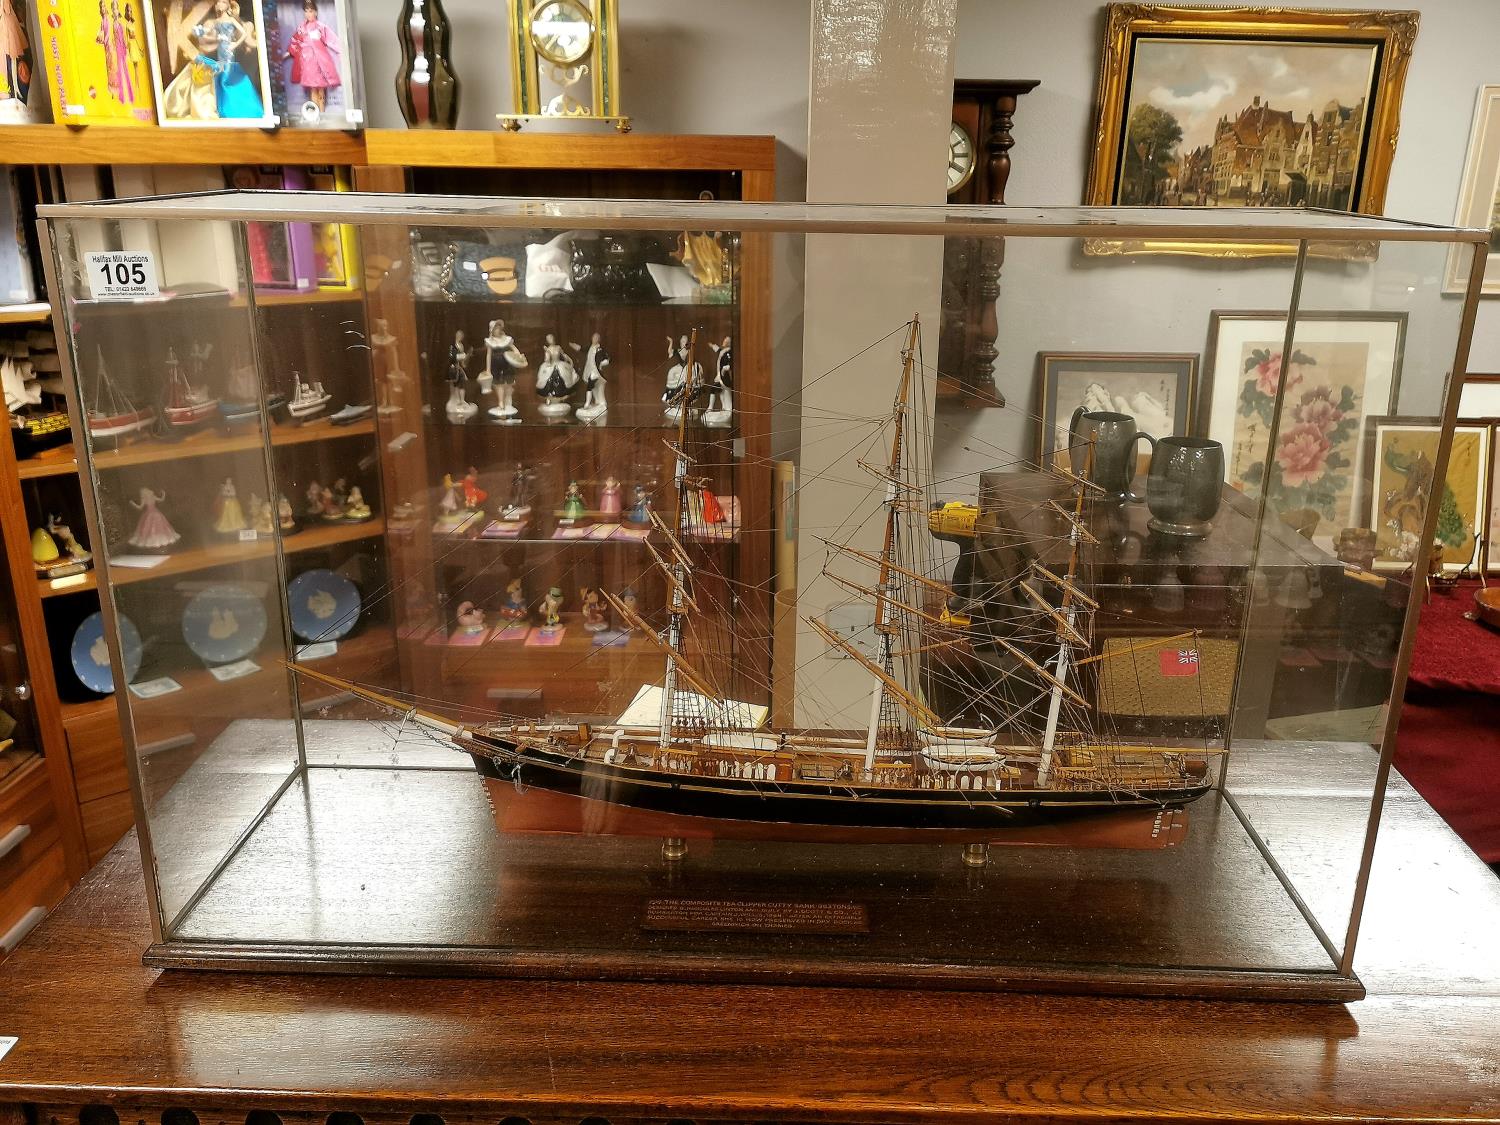 Glass Cased Model of the Cutty Sark Sailing Ship - 49cm h x77l x 25w